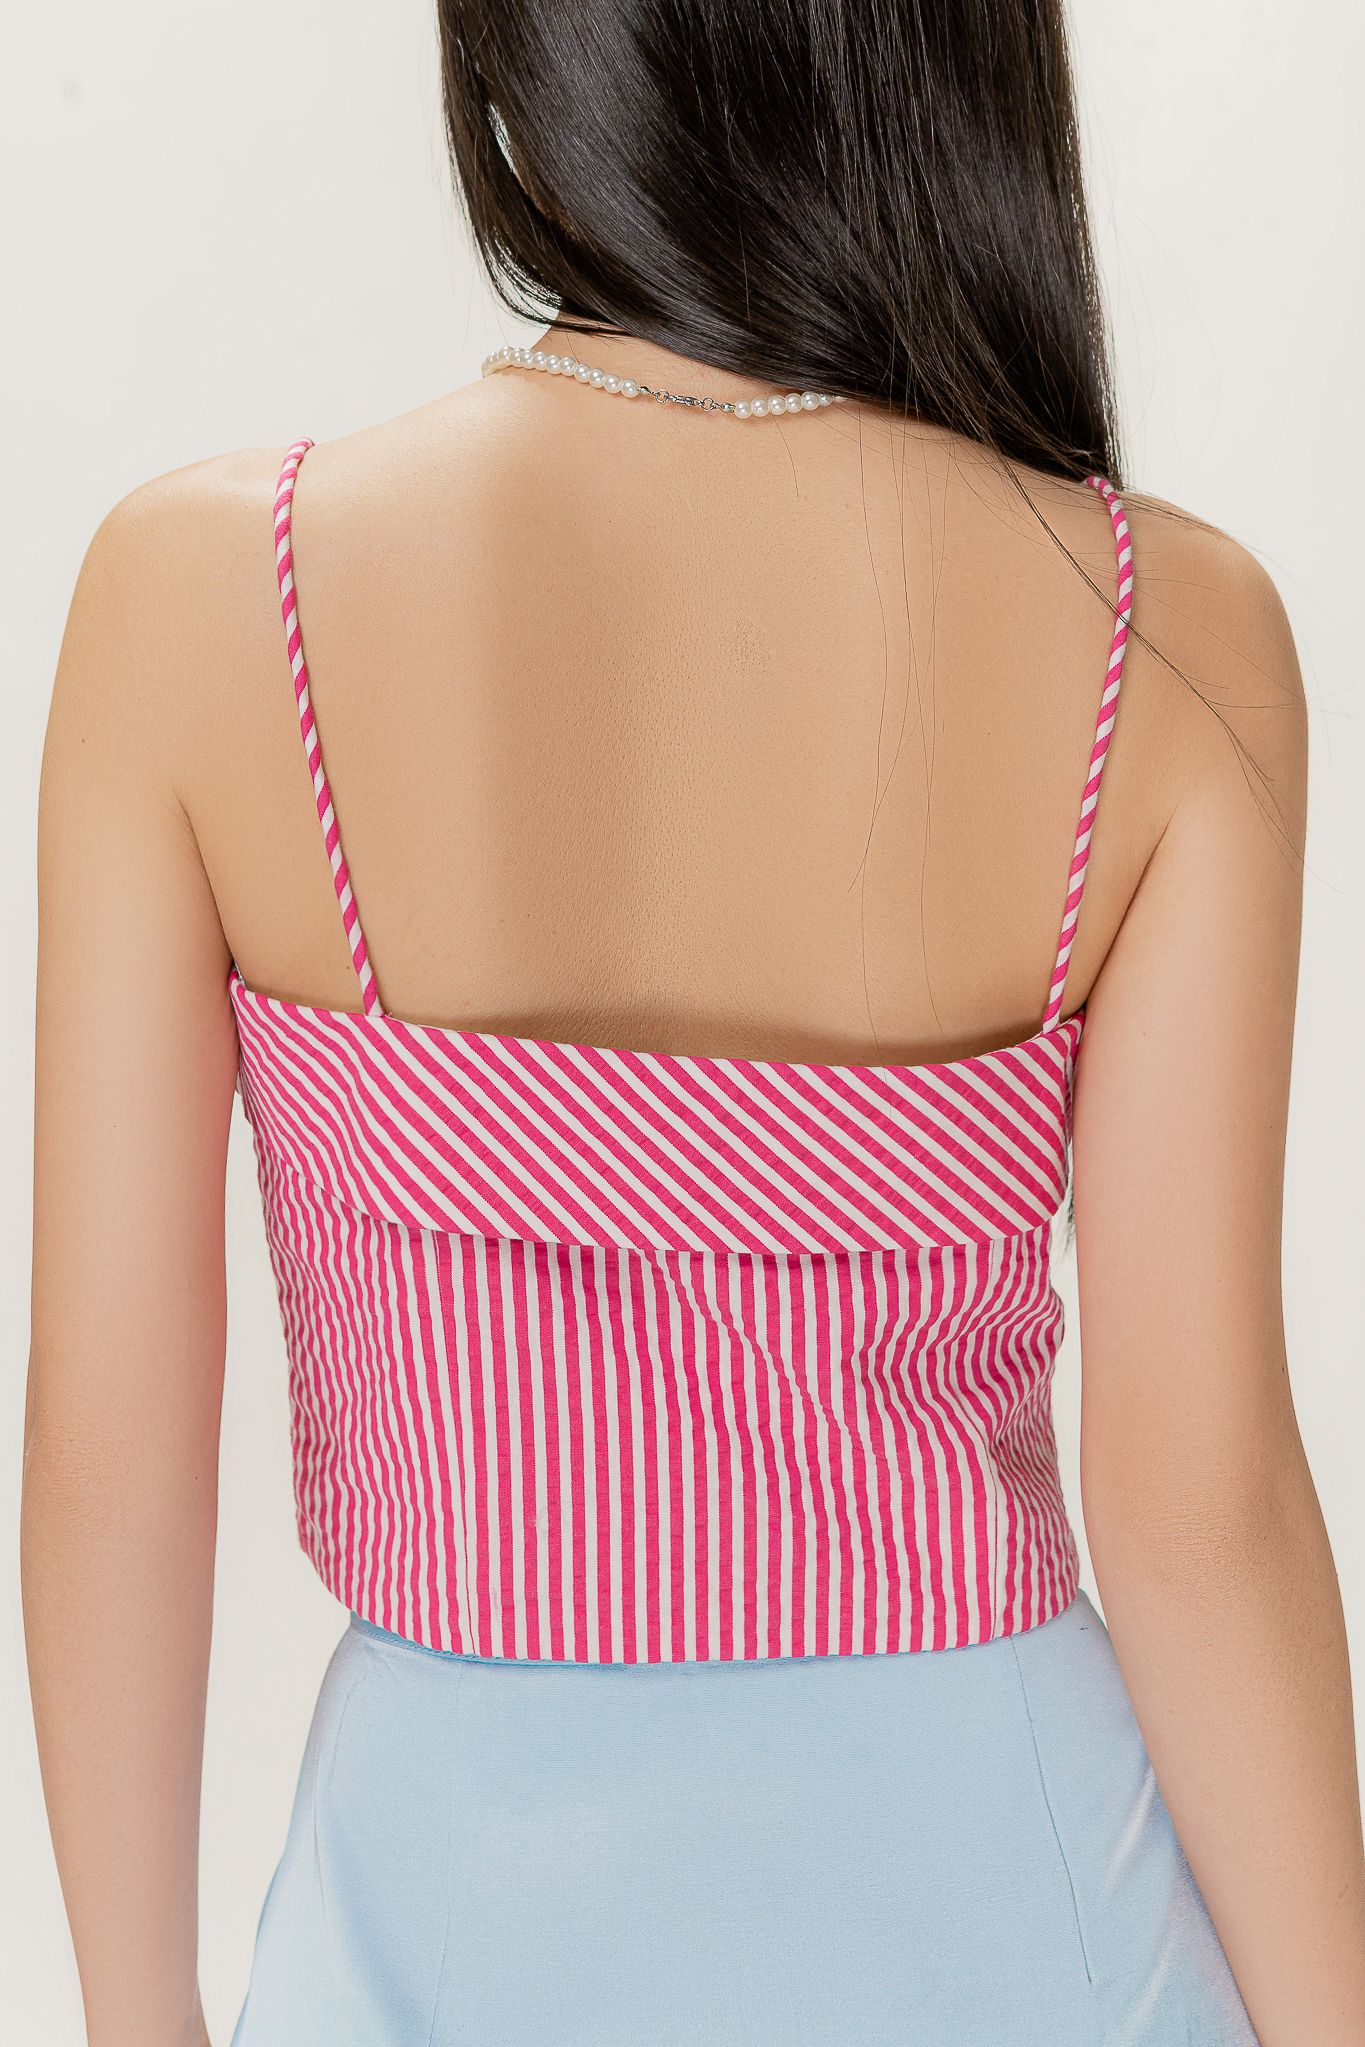  Pink Striped Corset Style Top 